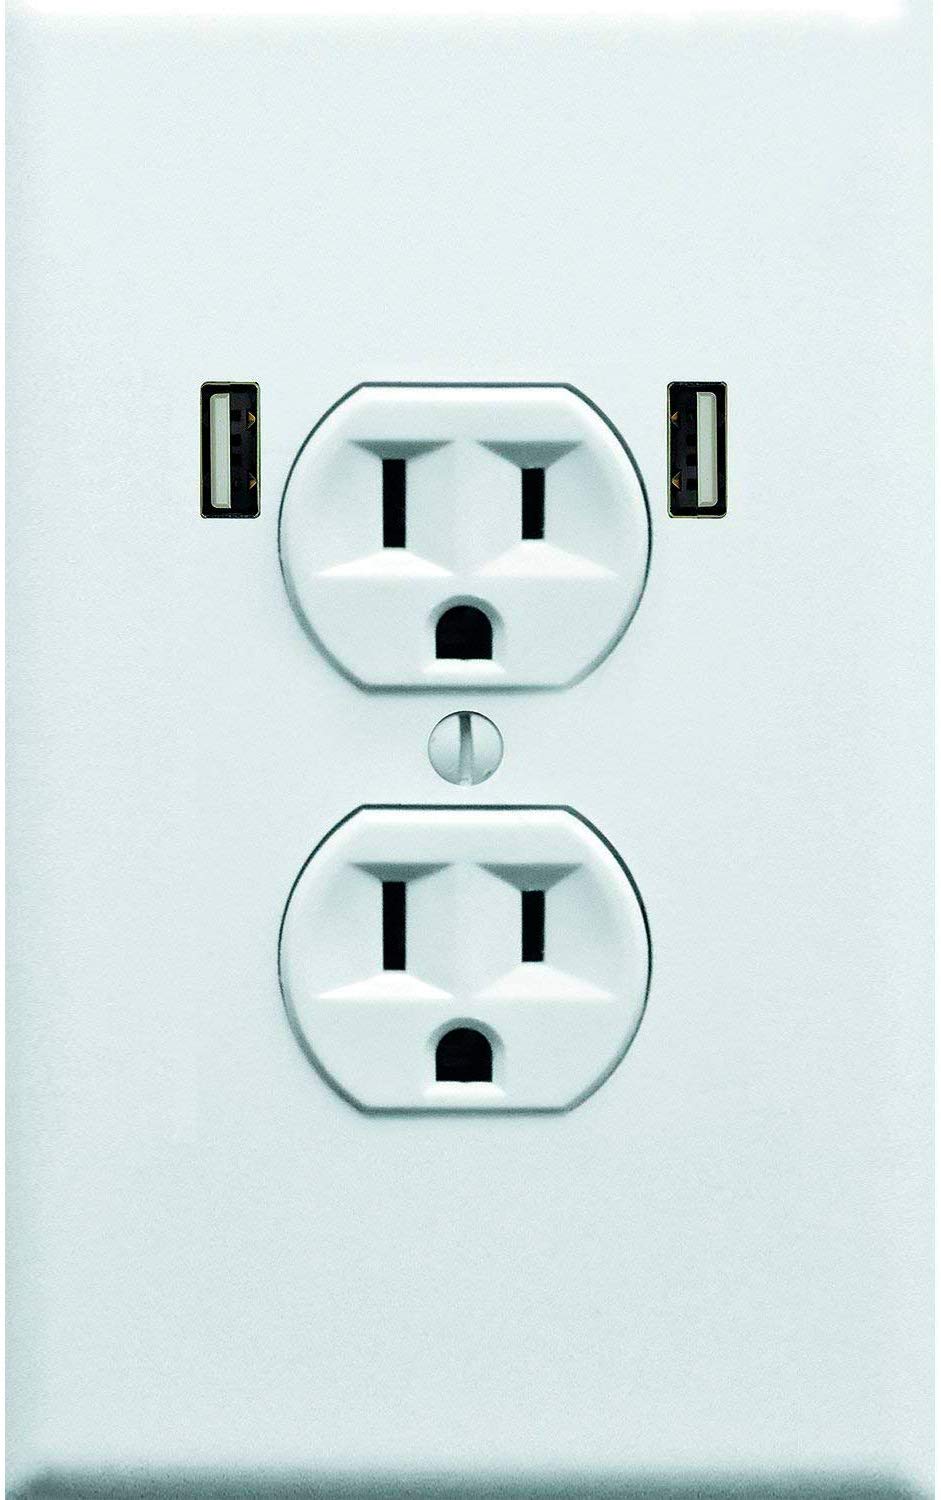 Fake Electrical Outlet & USB Wall Plate Sticker 10 Pack. Prank & Confuse 